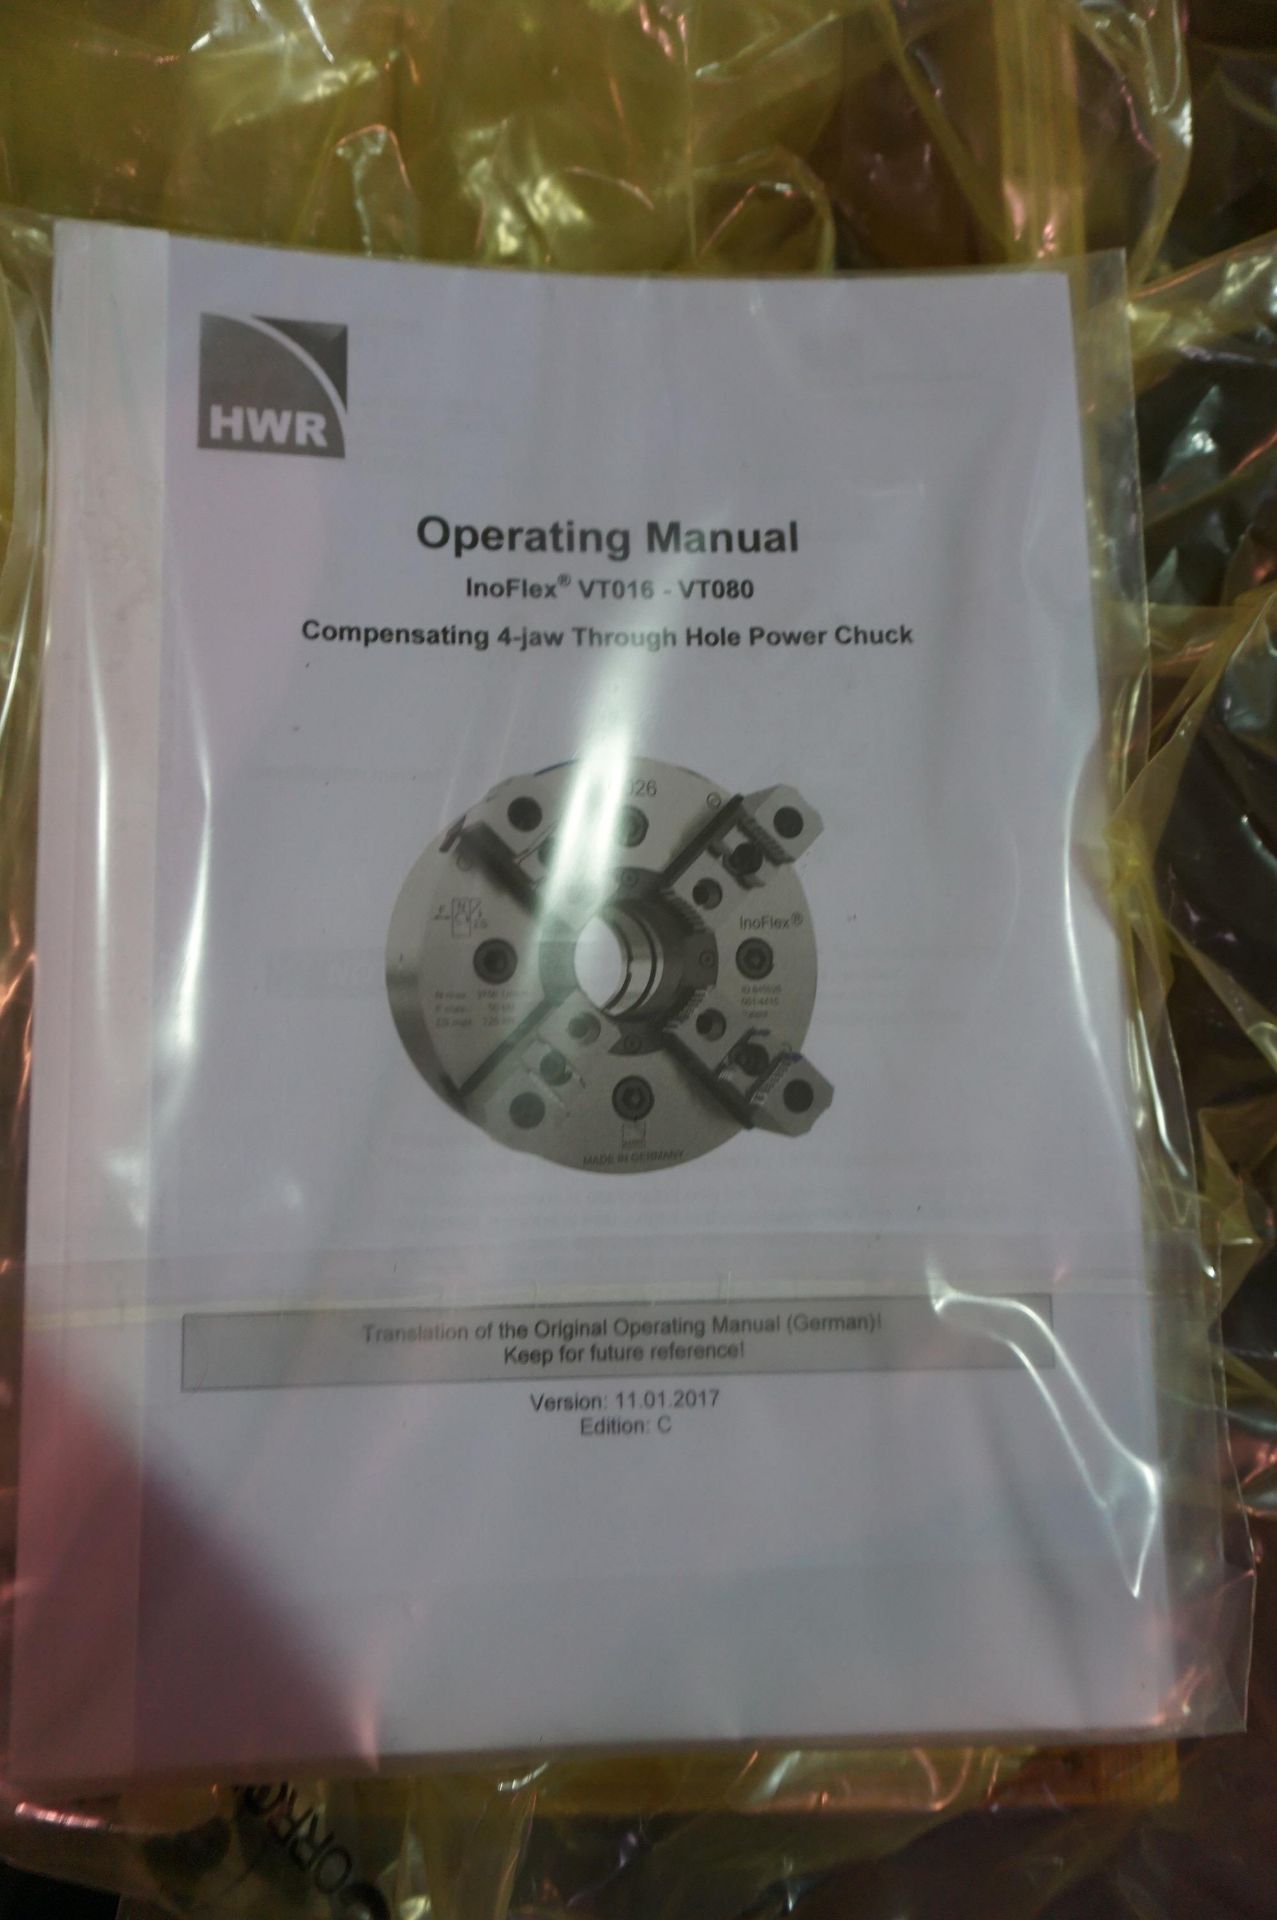 IN ORGINAL CRATE: HWR INOFLEX VT040 15"COMPENSATING 4 JAW THROUGH HOLE POWER CHUCK - Image 3 of 5